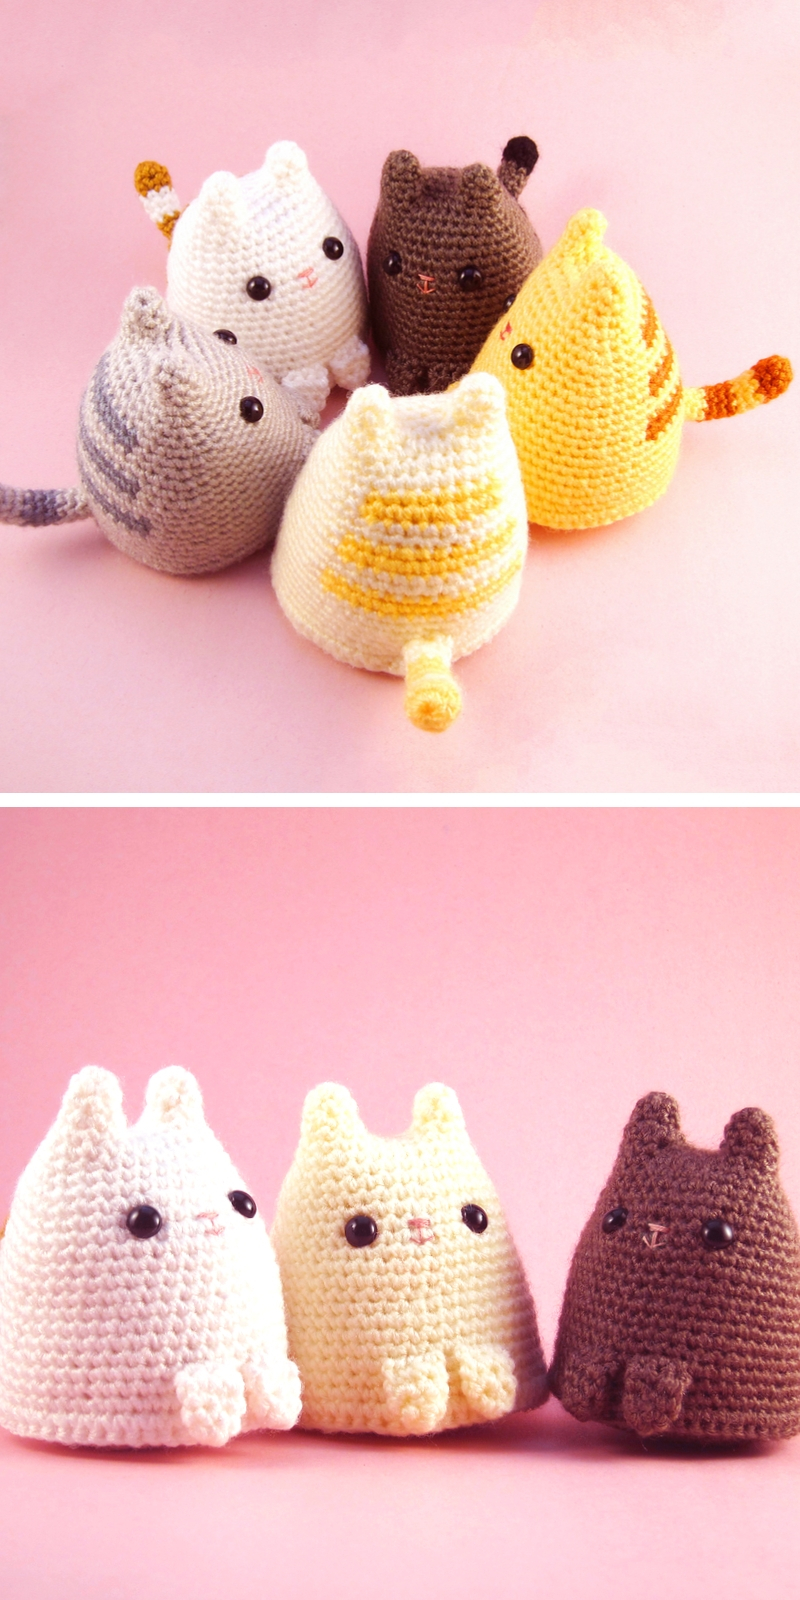 28 Amigurumi Cats Free Crochet Patterns for Cuddling and Play